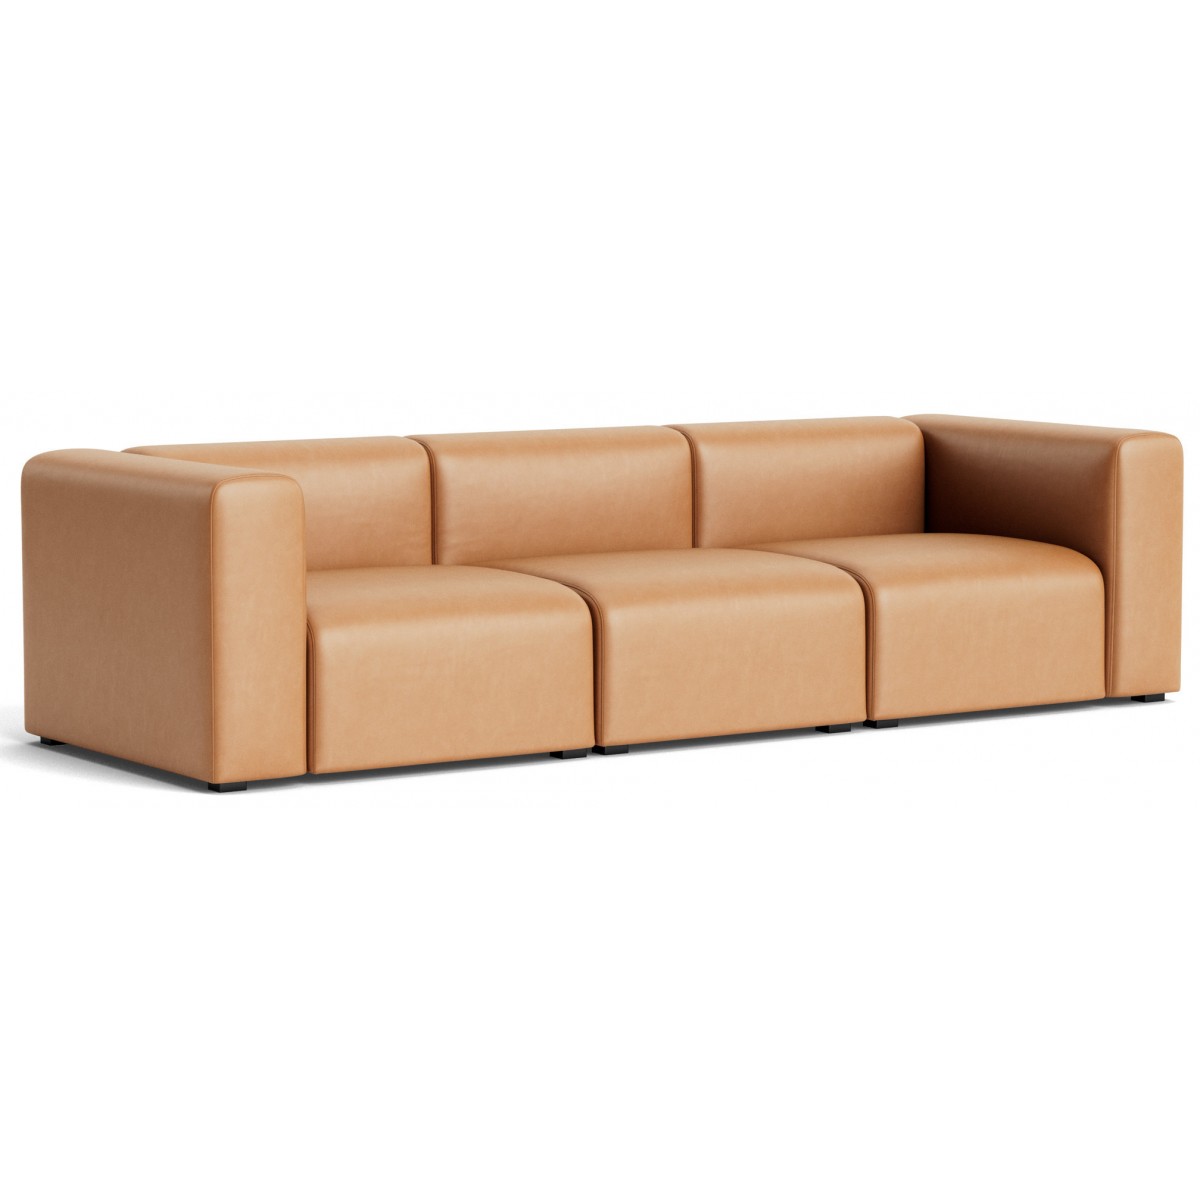 Sense nougat leather - Mags 3-seater – Comb. 1